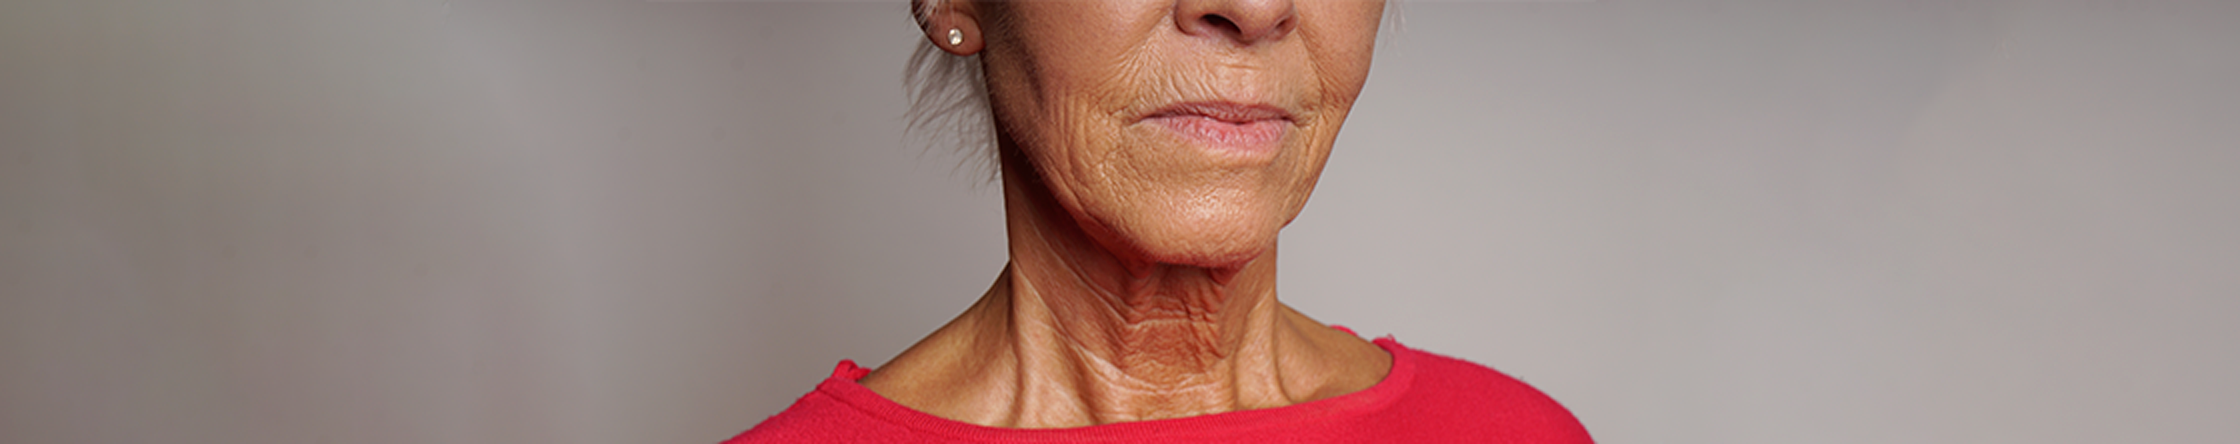 Embracing Our Aging Necks: Overcoming Insecurities